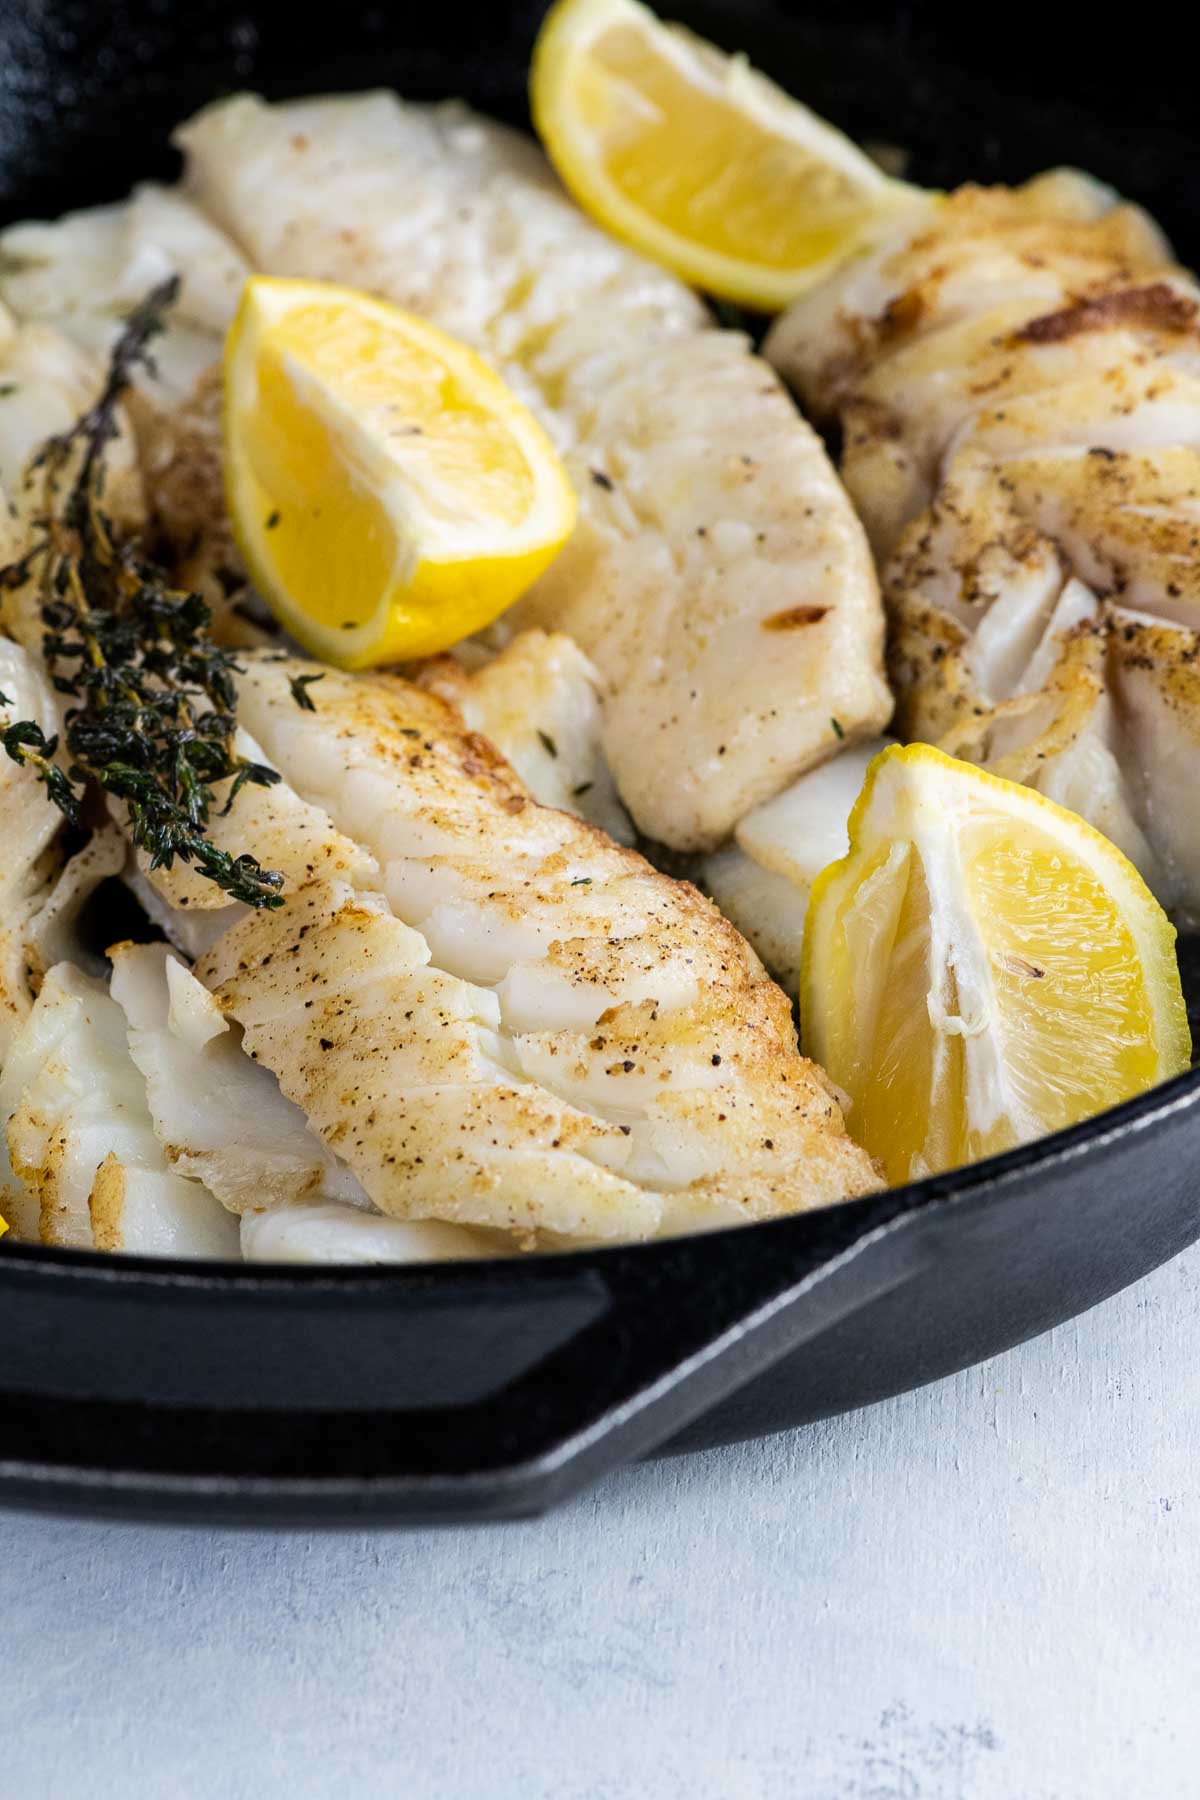 pan fried cod with thyme and lemon wedges in a cast iron skillet